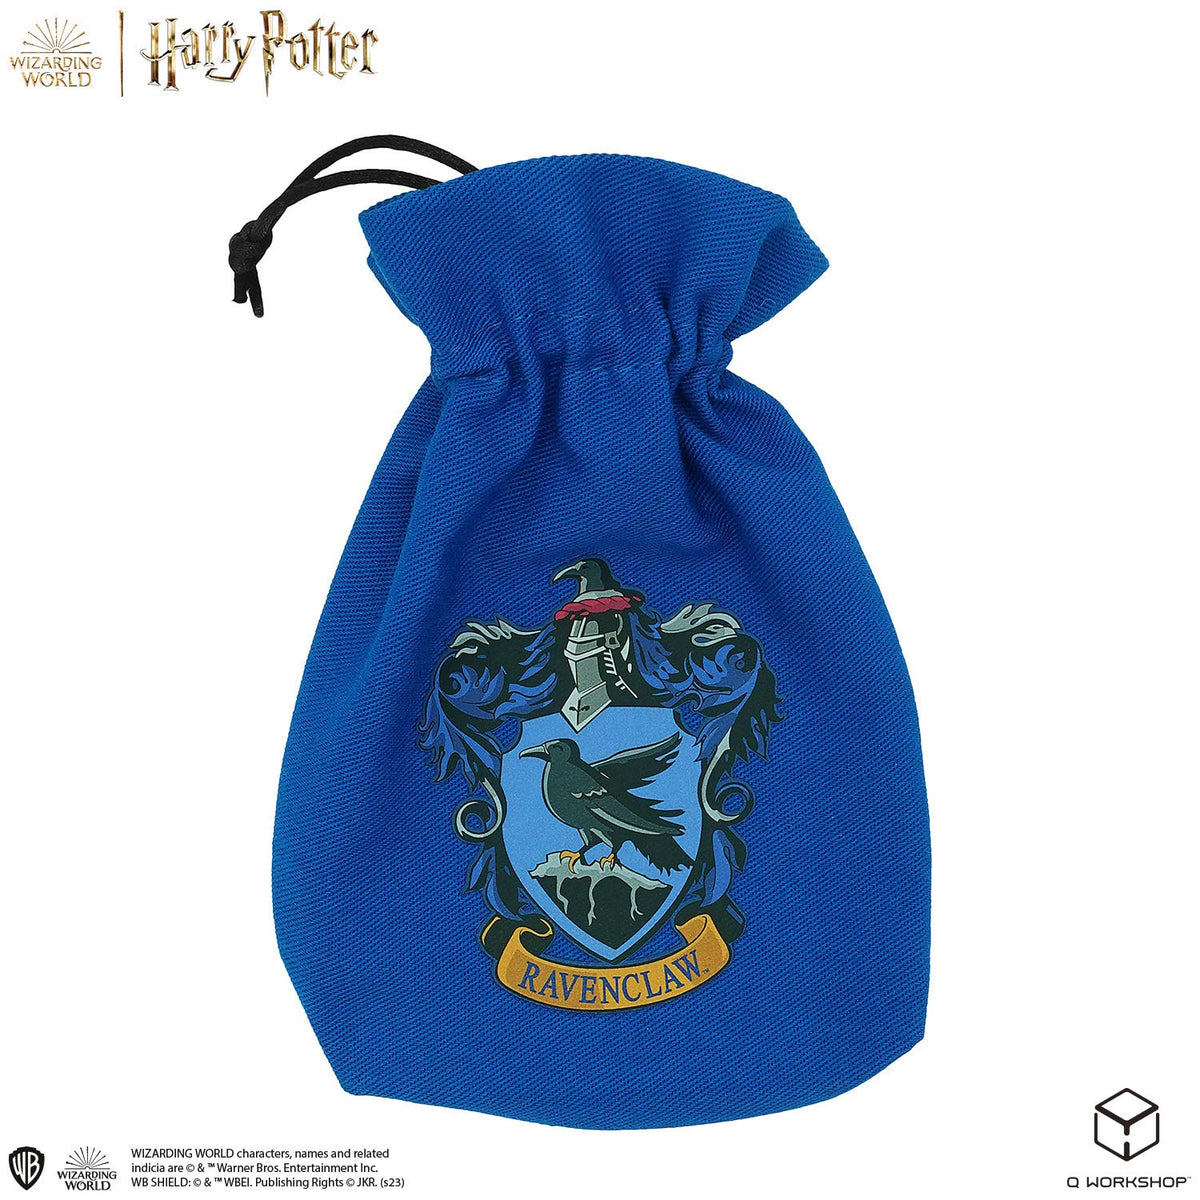 Q Workshop - Harry Potter Ravenclaw Dice and Pouch